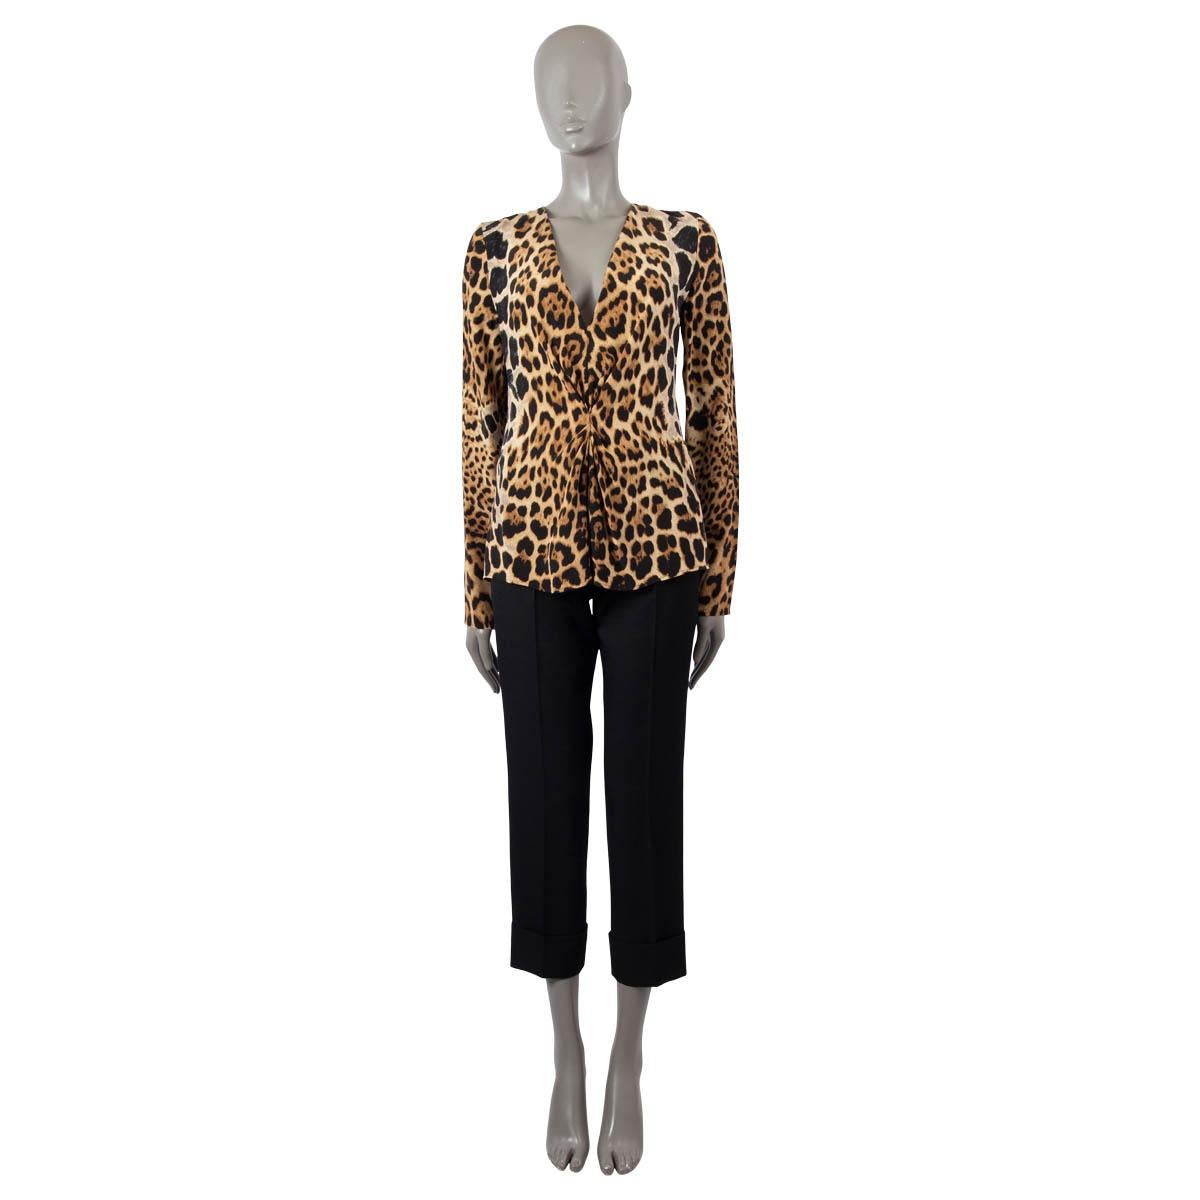 100% authentic Saint Laurent blouse in beige silk (100%) with leopard print. Features a pleated detail at the front and deep V-neck. Closes with a concealed zipper in the back. Unlined. Has been worn and is in excellent condition.

Measurements
Tag